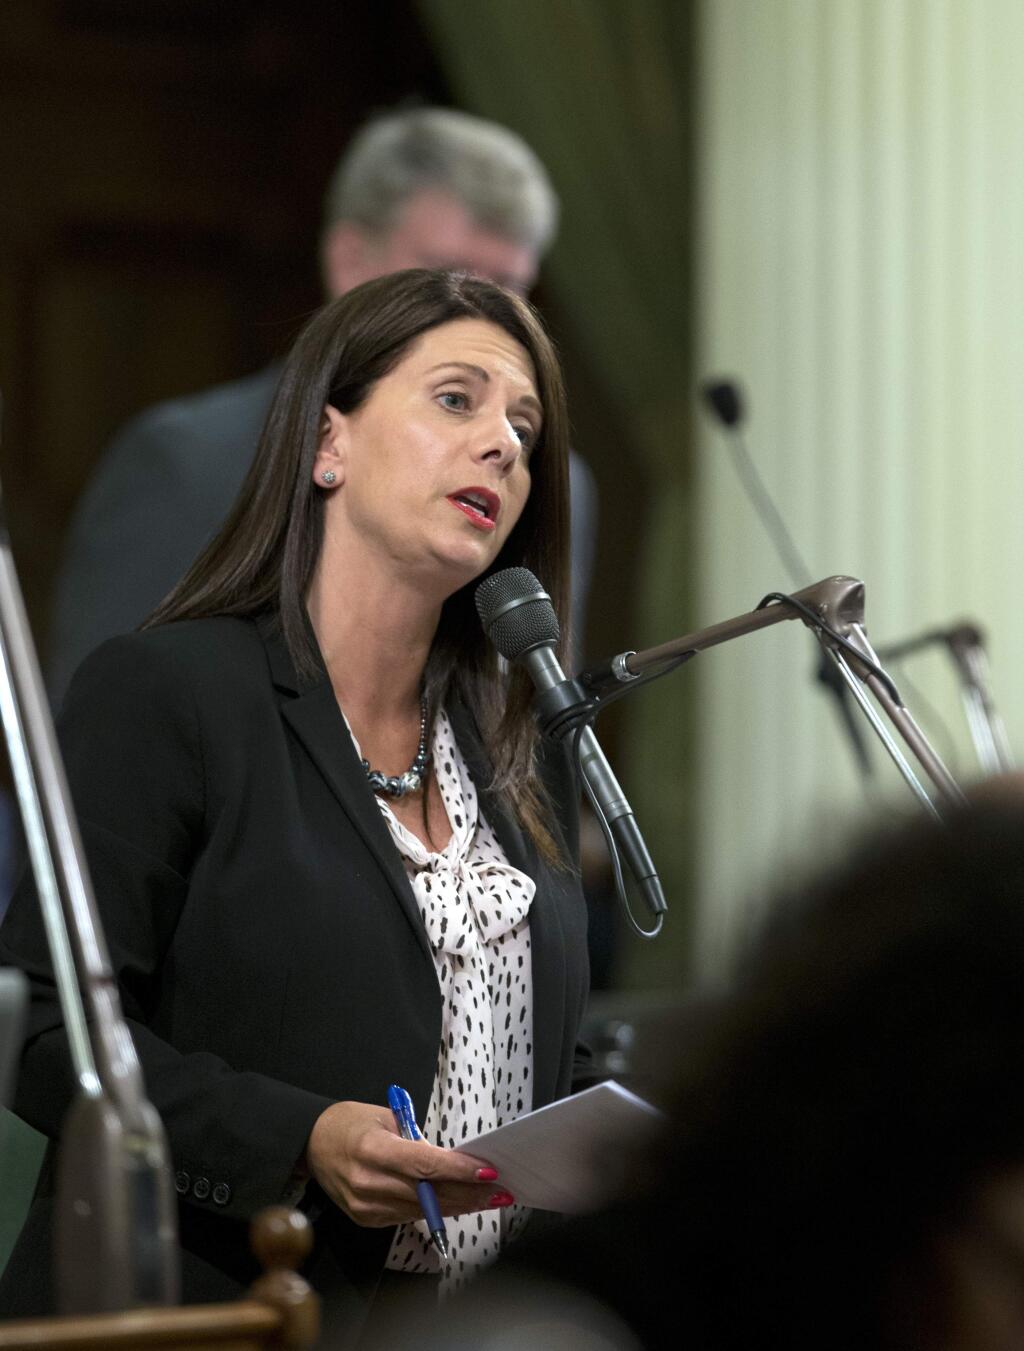 FILE - In this Aug. 18, 2016 file photo, Assemblywoman Melissa Melendez, R-Lake Elsinore, speaks at the Capitol, in Sacramento, Calif. Melendez is the prime sponsor of the bill the California Senate unanimously approved Thursday, Feb. 1, 2018, for whistleblower protections for legislative staff after four years of stonewalling the measure. The Senate's passage comes as the Legislature grapples with an ongoing sexual misconduct scandal that's prompted two members to resign and another to take a leave of absence. State employees receive whistleblower protections but they do not extend to legislative staff. (AP Photo/Rich Pedroncelli, File)